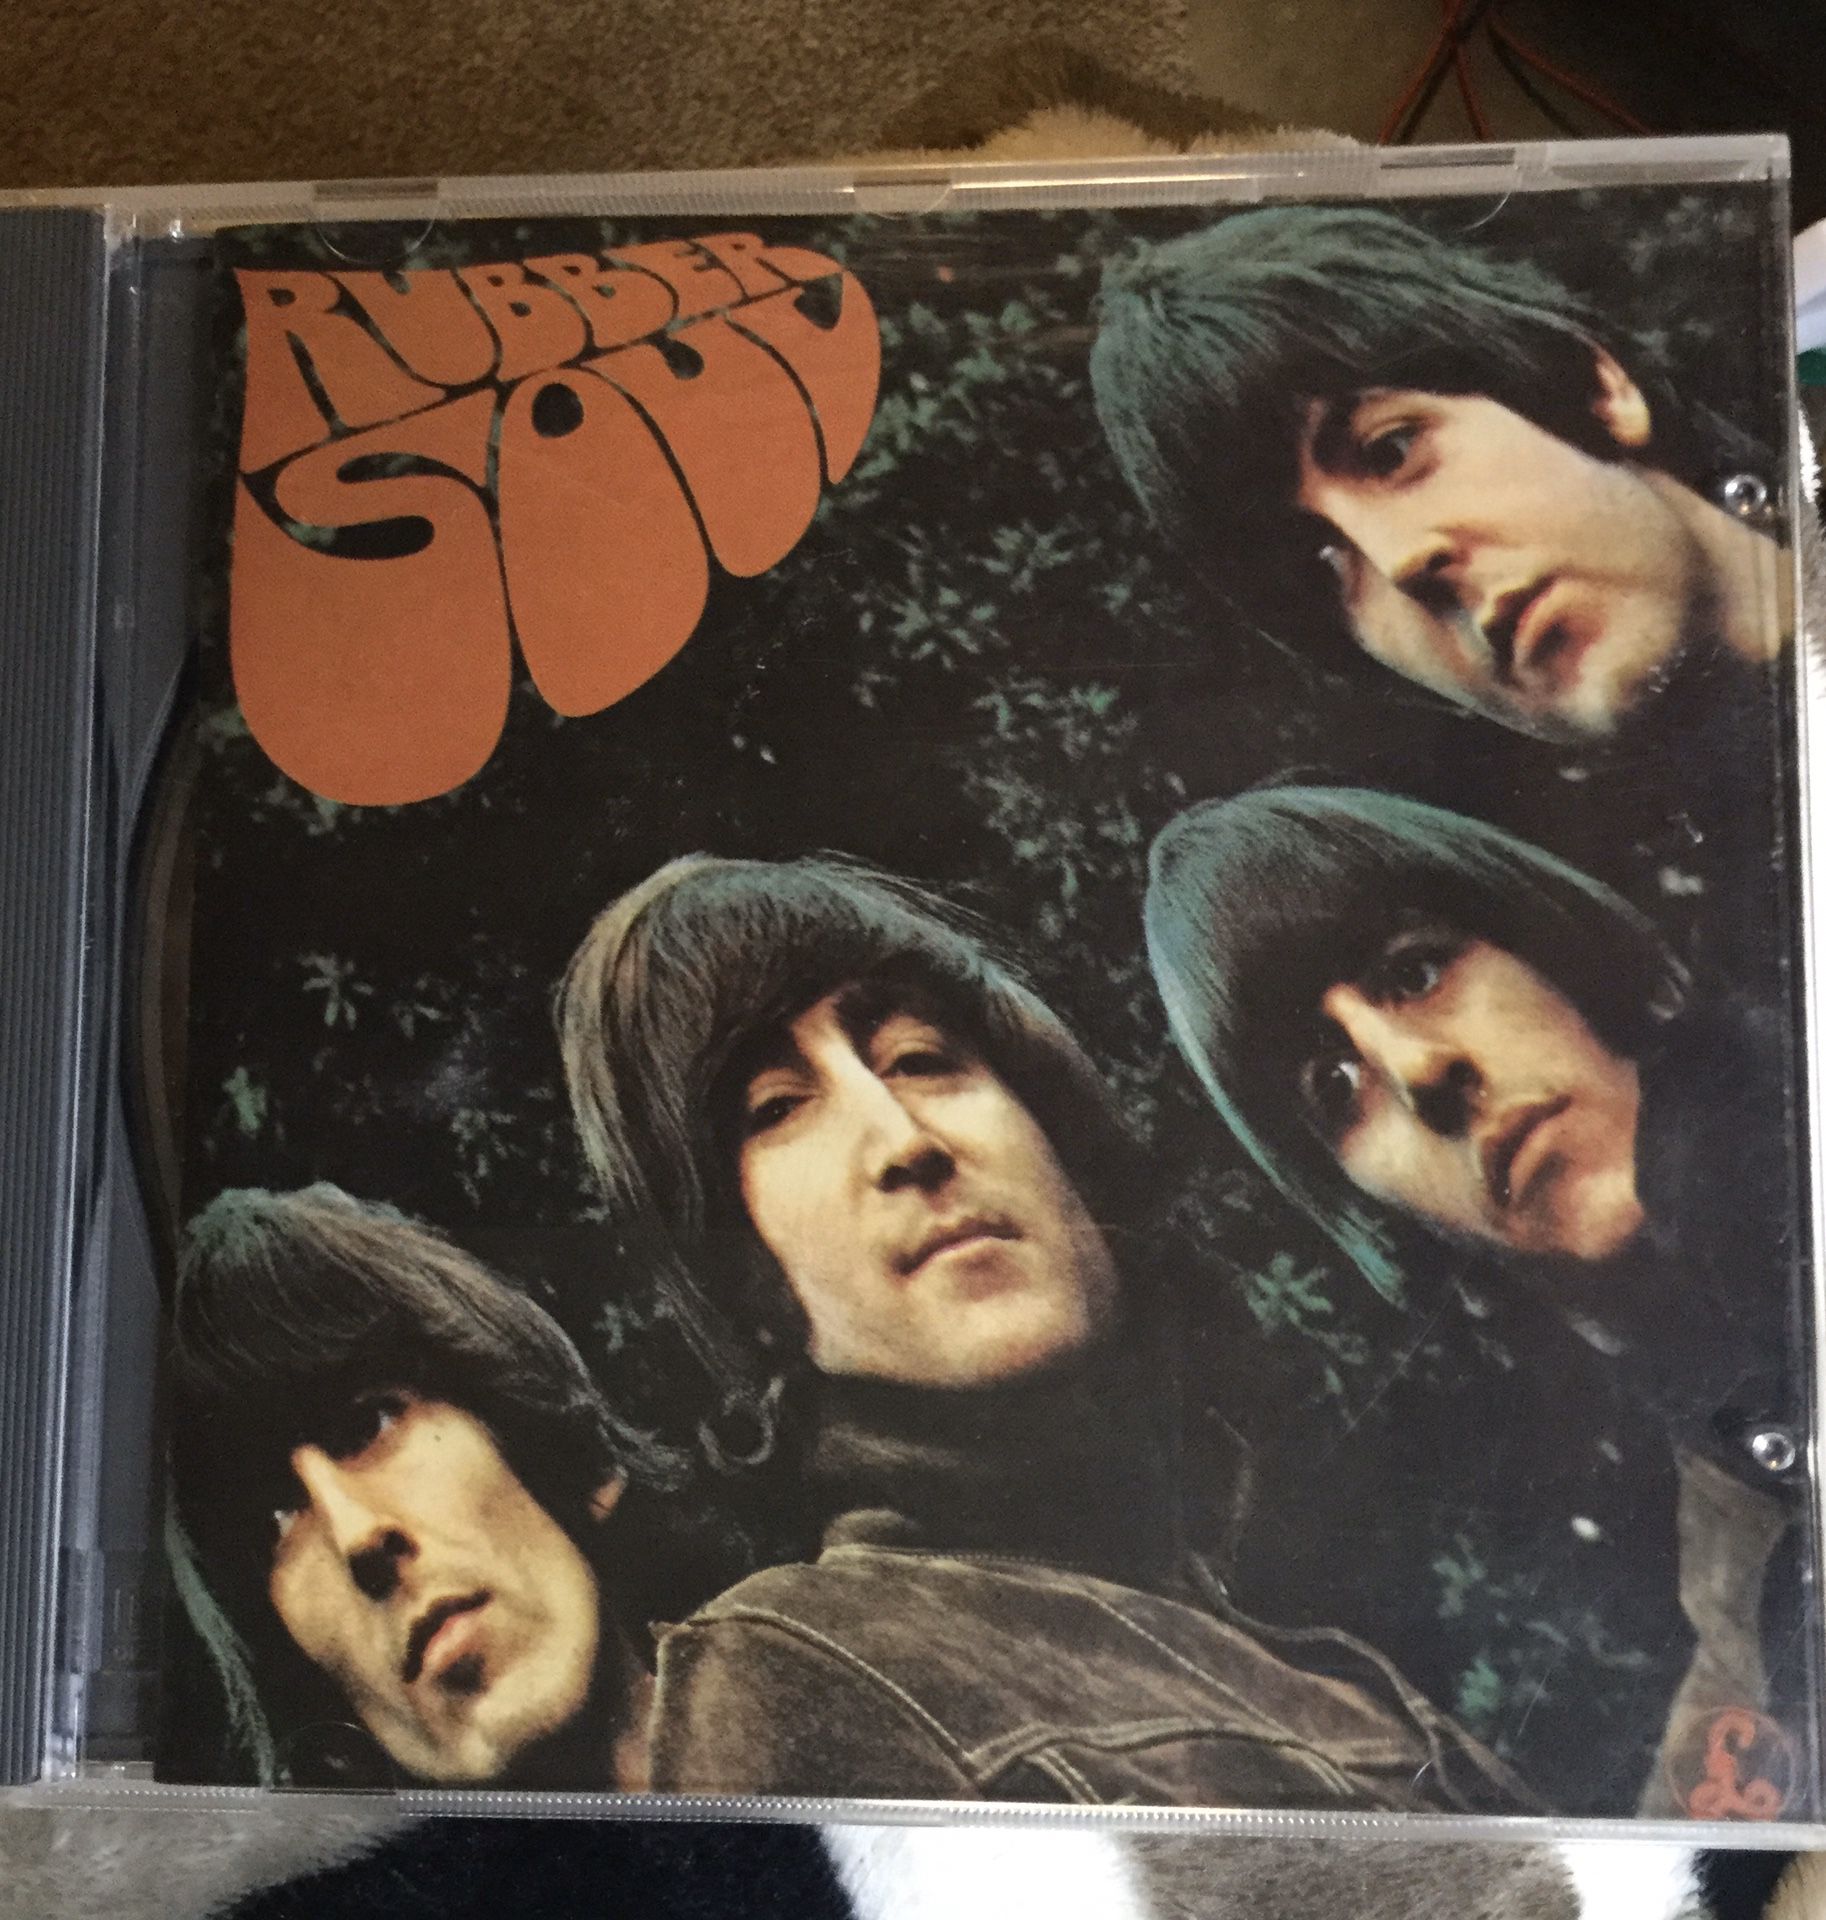 The Beatles Rubber SoulParlhone CD Pristine Condition FREE SHIP WITH PAYPAL